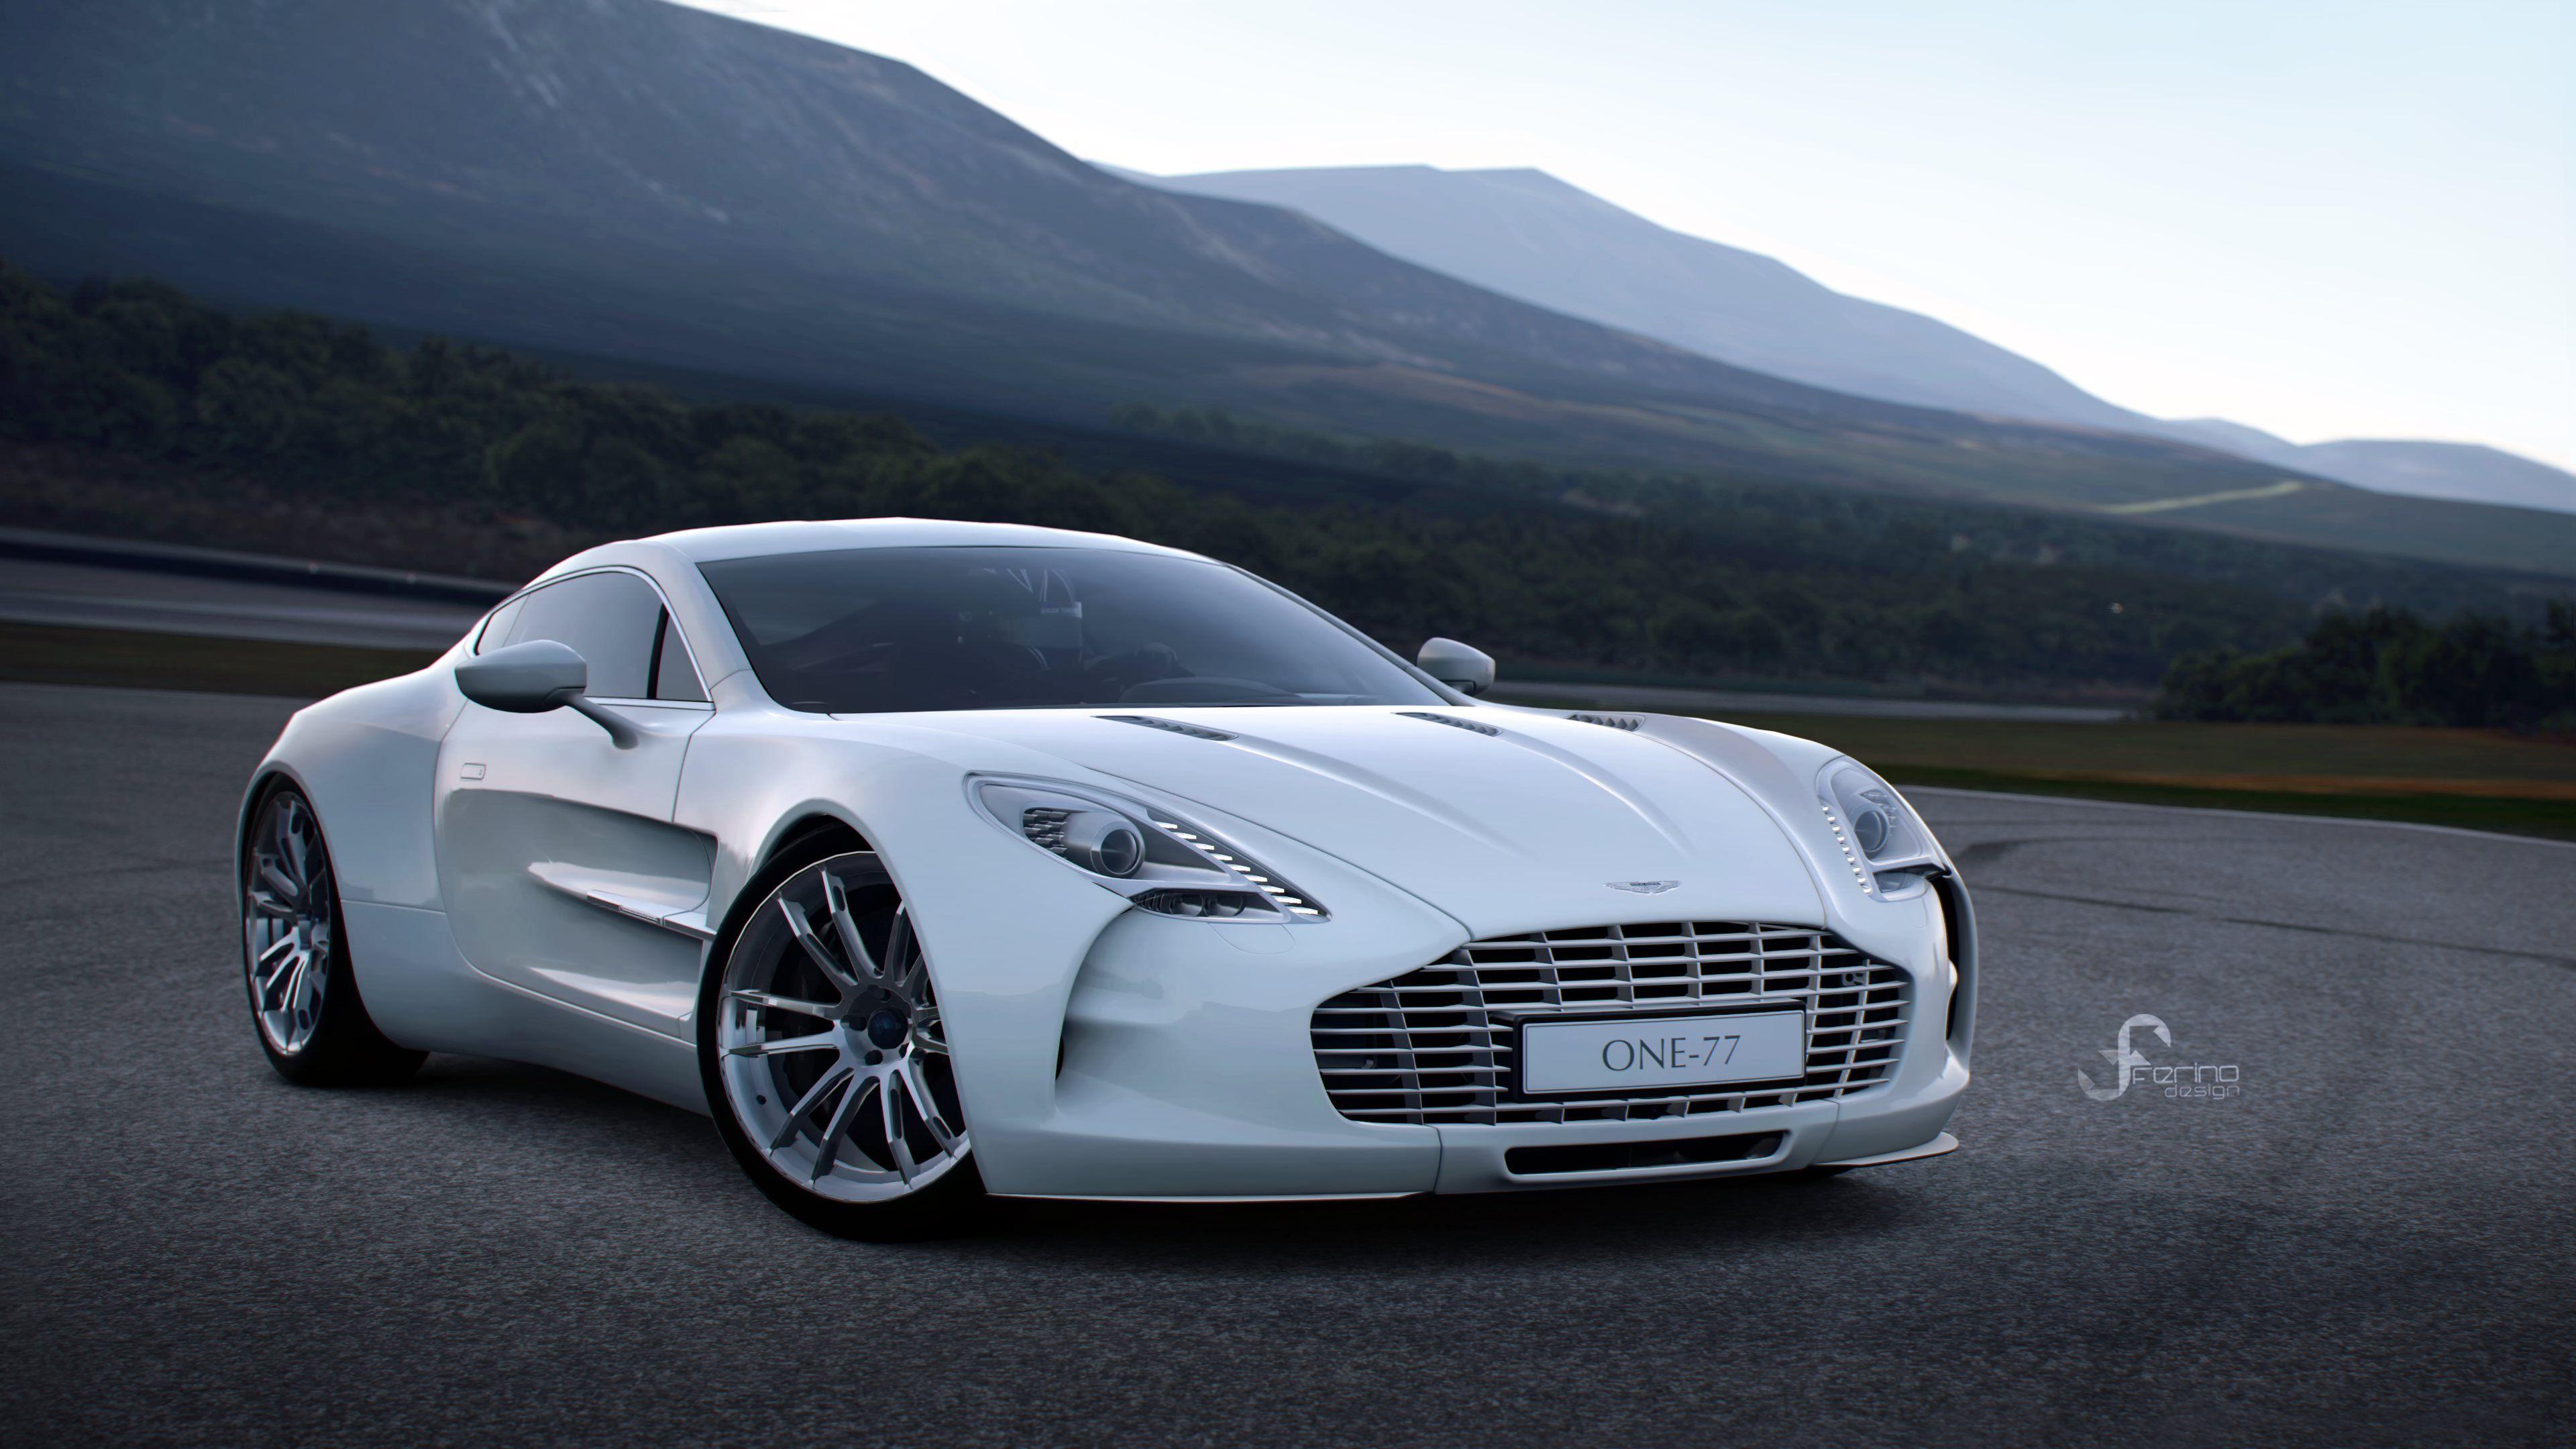 Aston Martin One 77 Wallpapers Top Free Aston Martin One 77 Backgrounds Wallpaperaccess